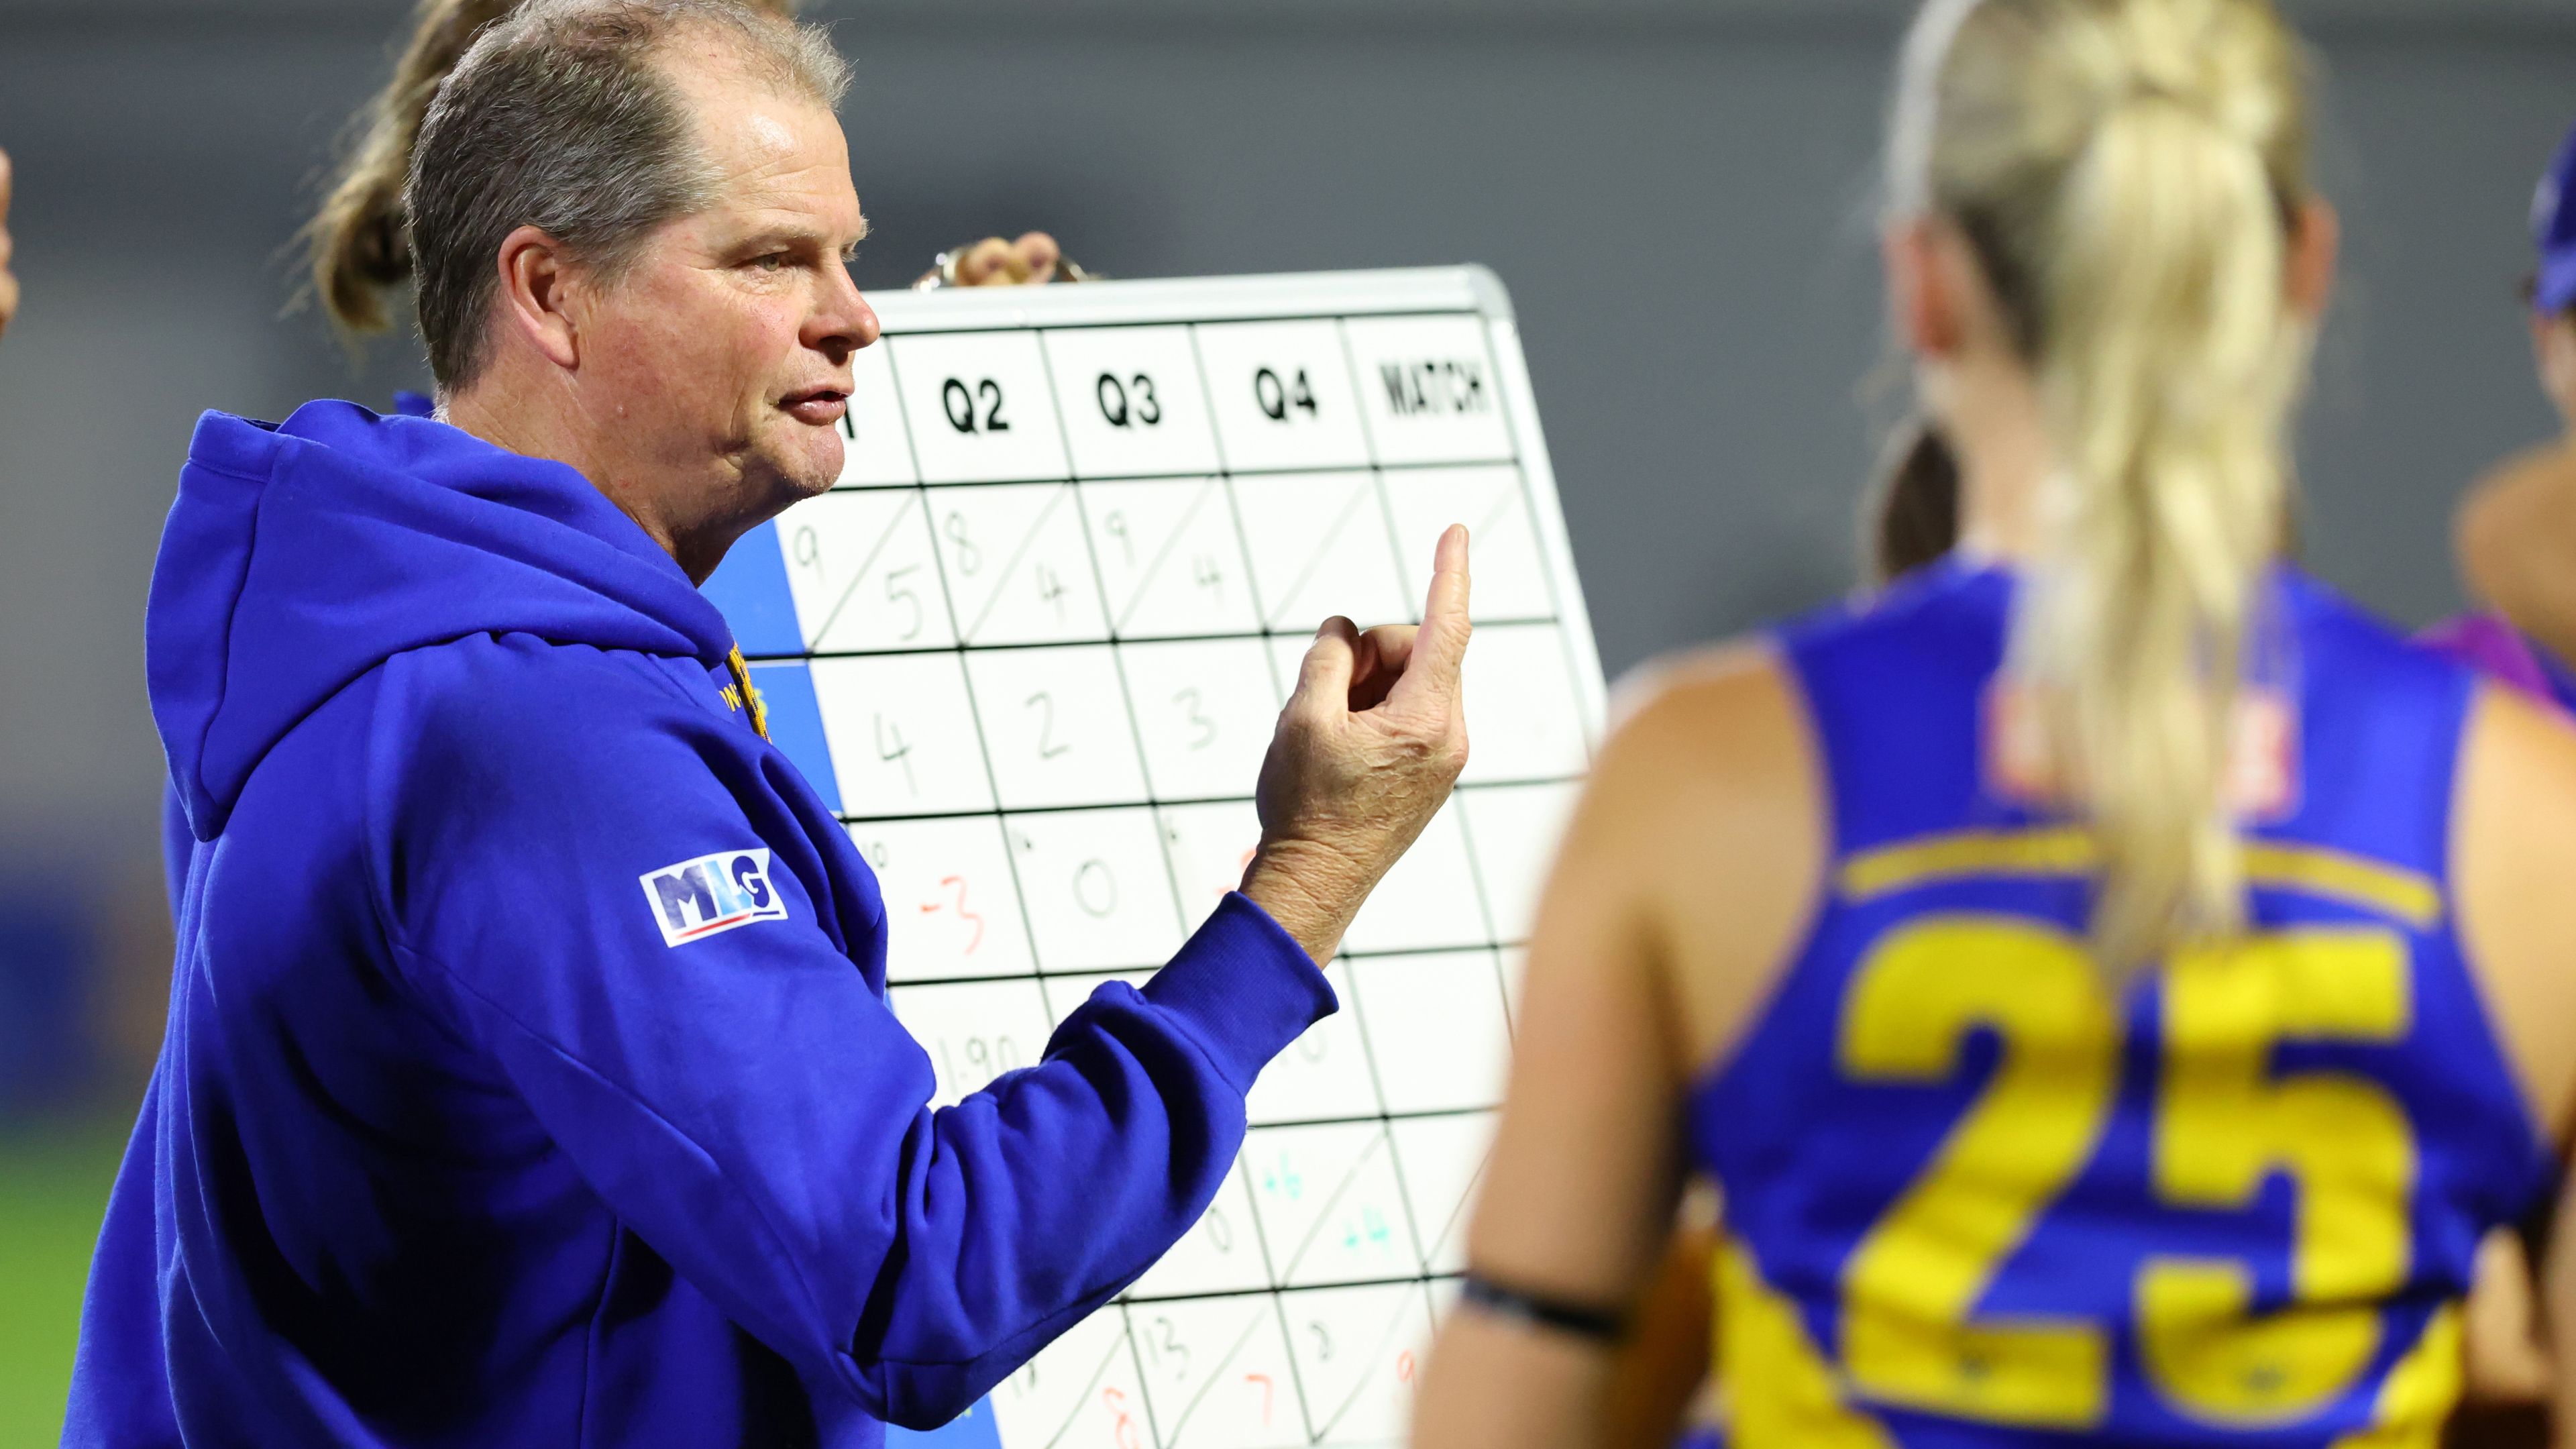 Michael Prior, coach of the Eagles in the AFLW.